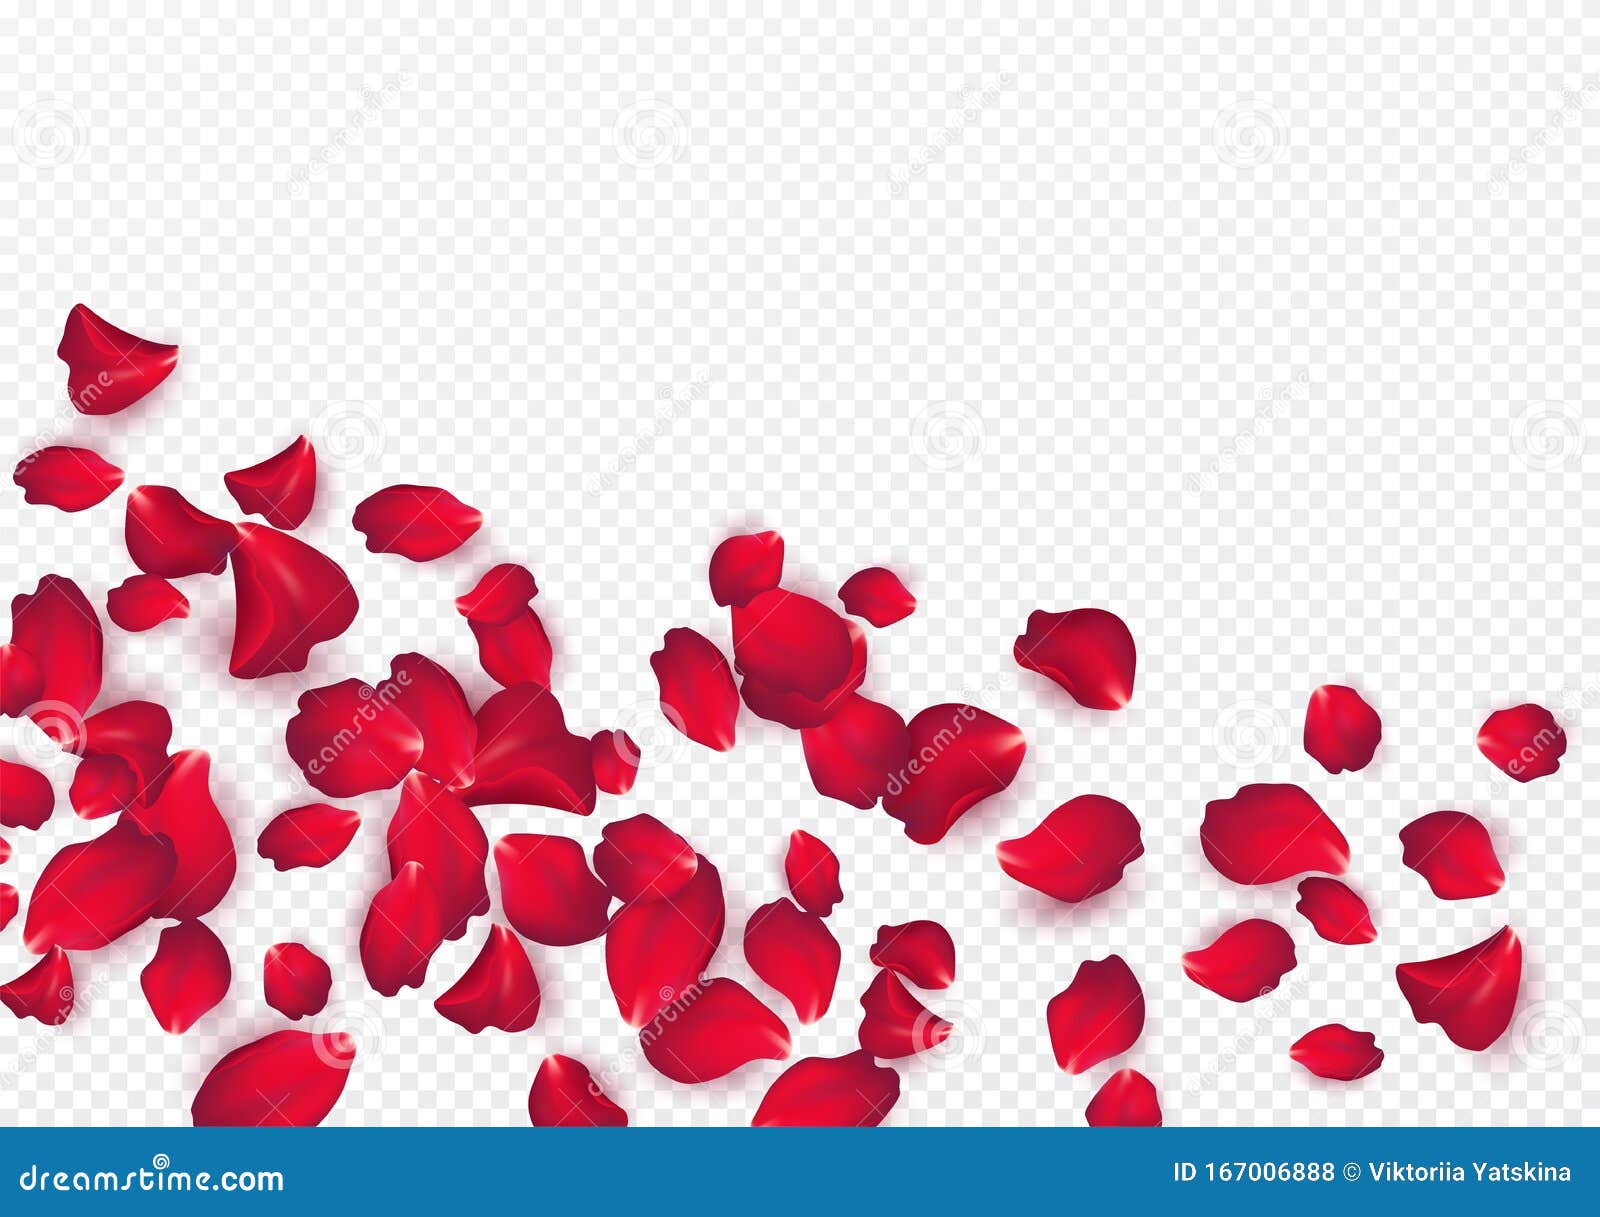 backdrop of rose petals  on a transparent white background. valentine day background.  